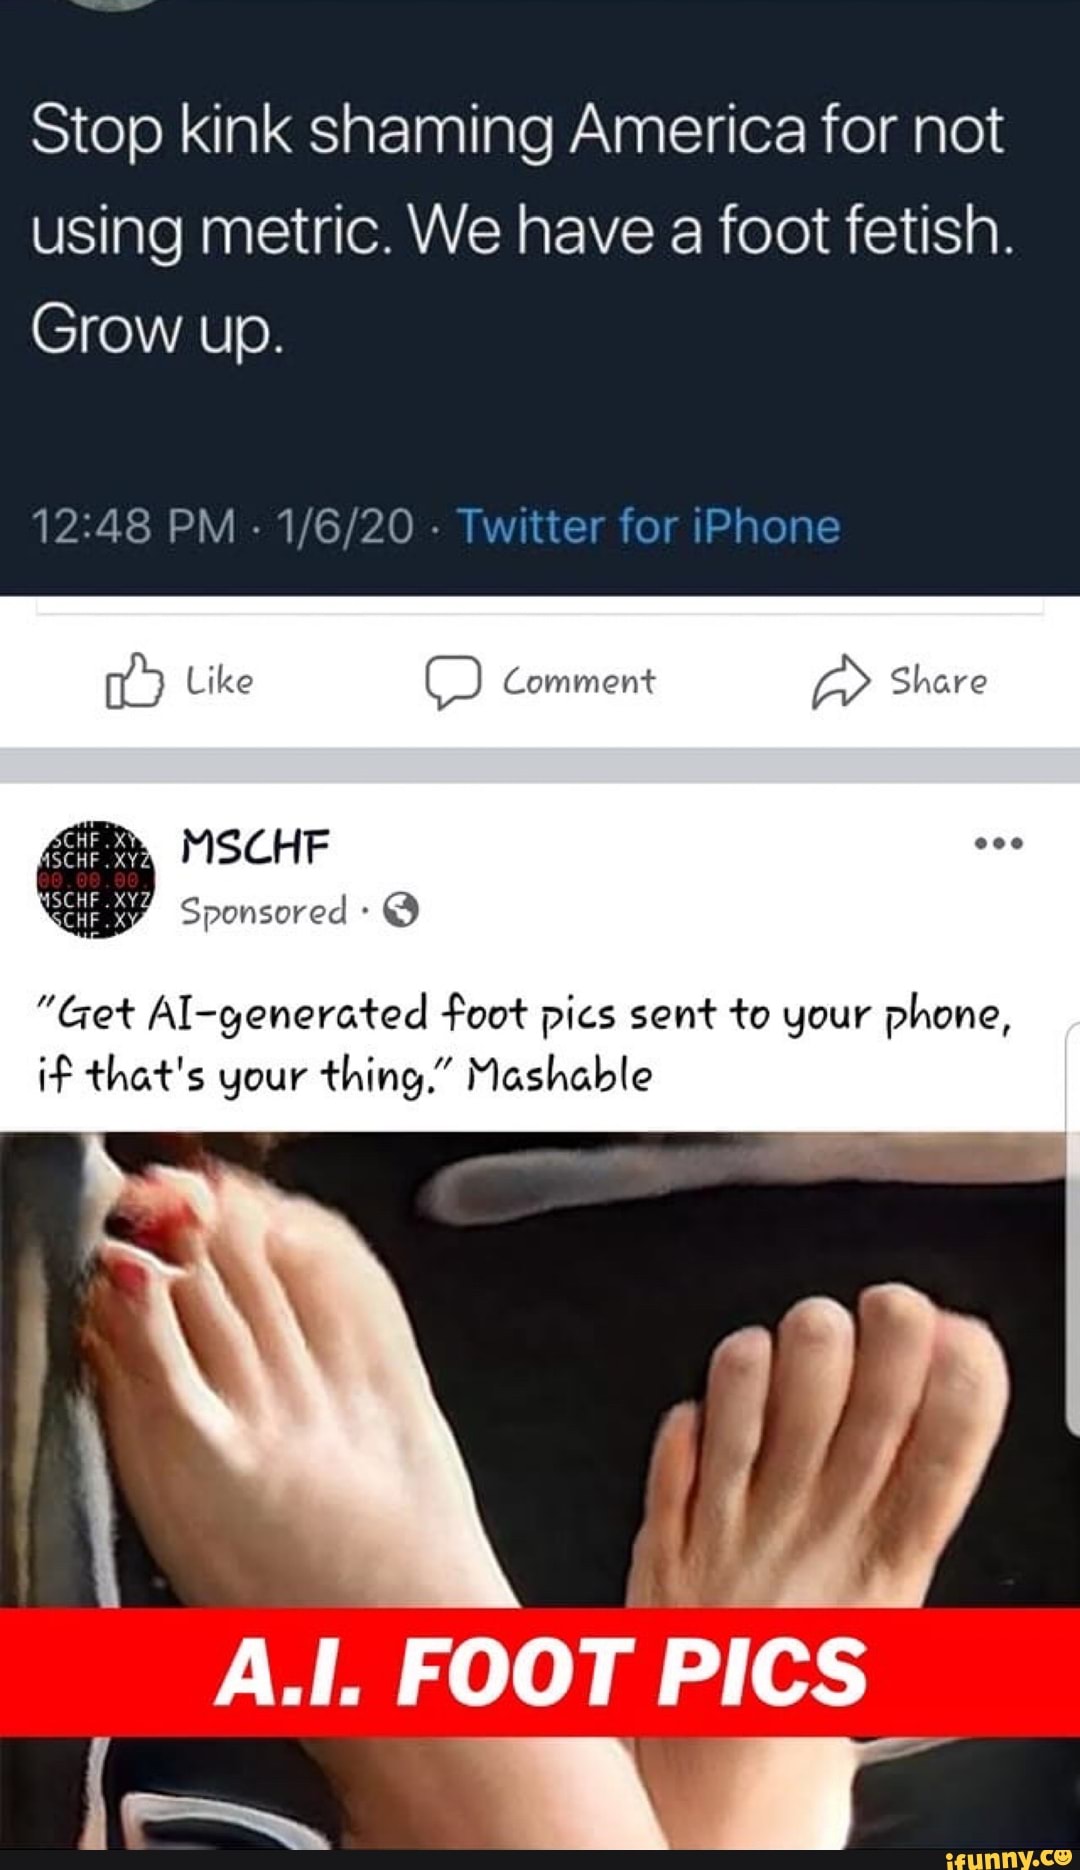 Get AI-generated foot pics sent to your phone, if that's your